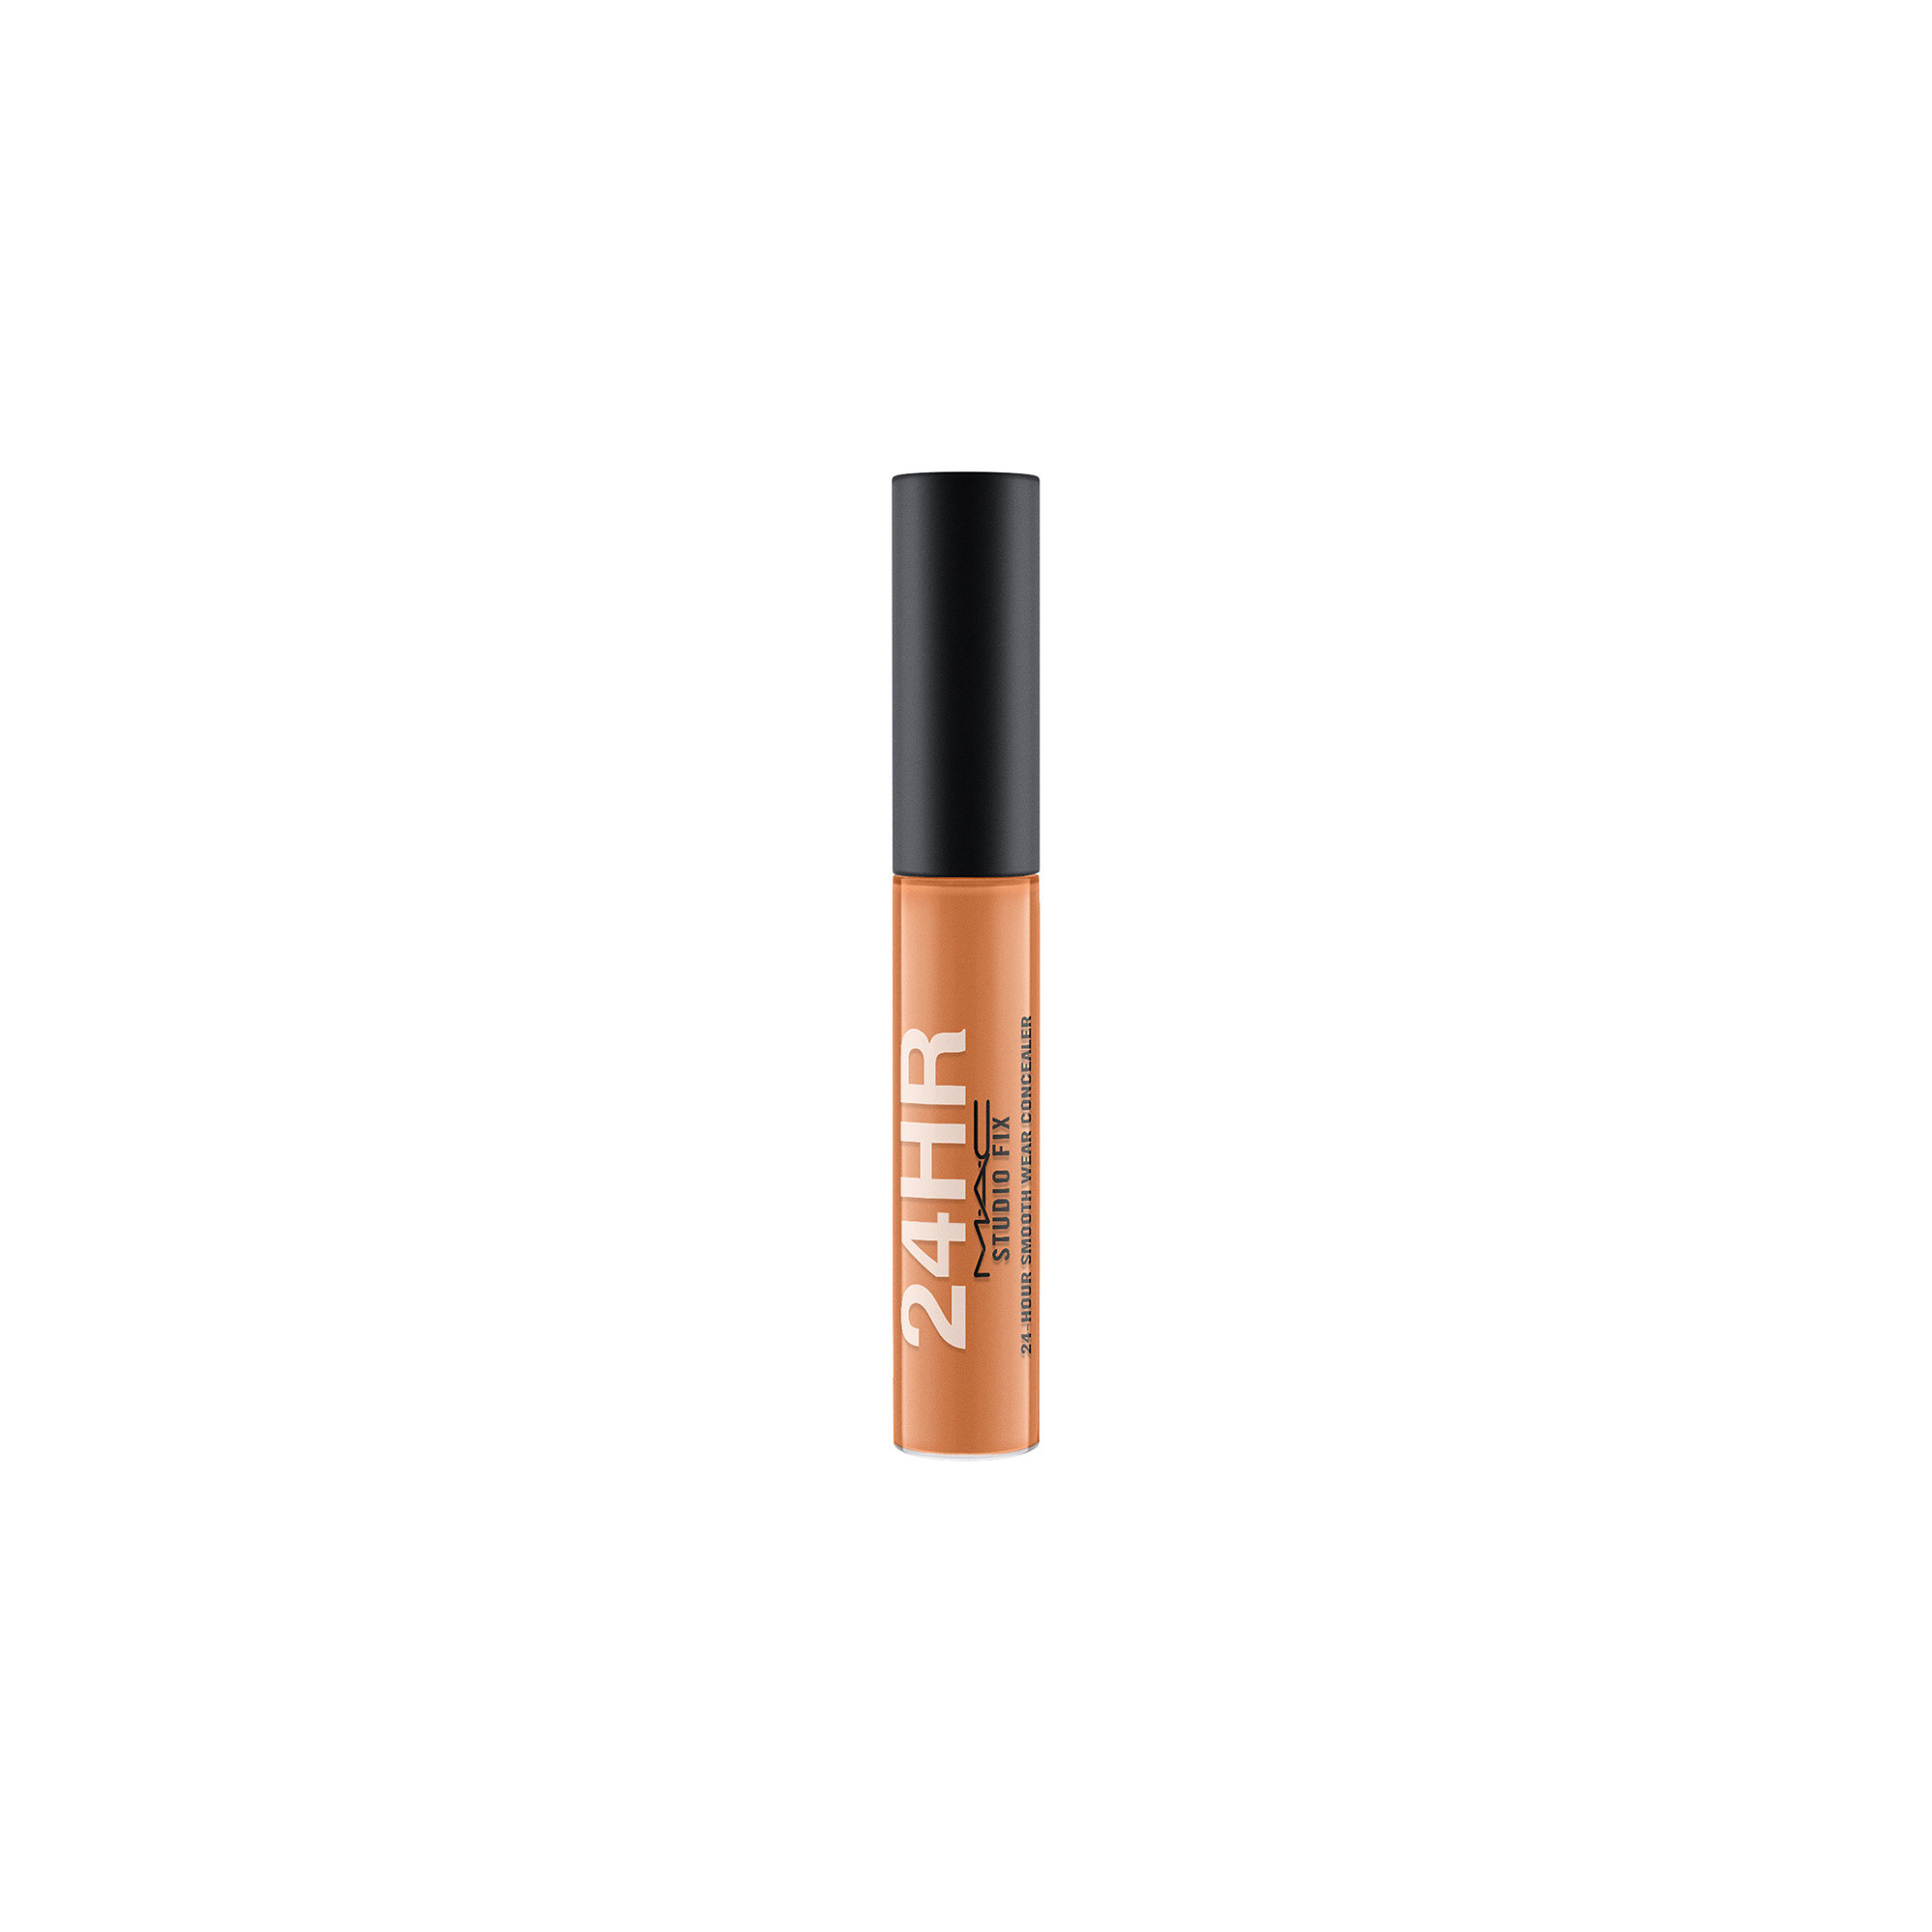 Studio Fix 24H Concealer - NW45, NW45, large